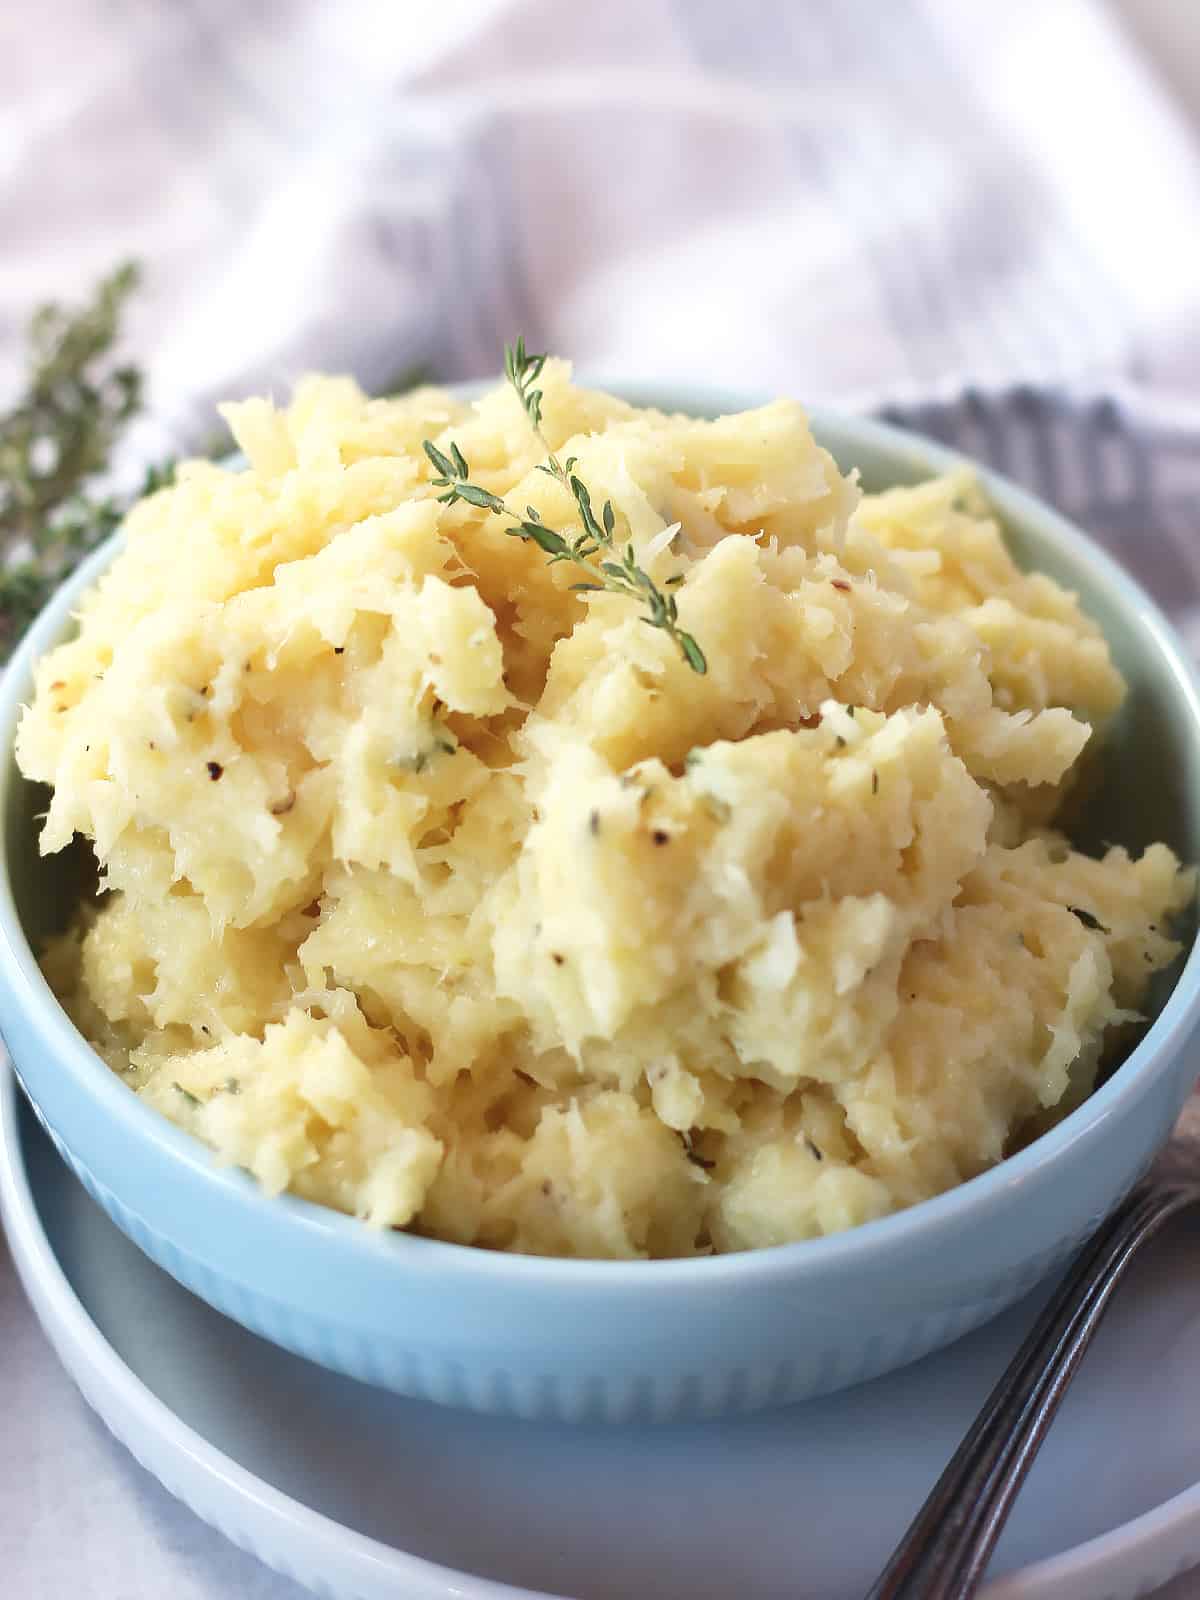 Mashed parsnip in a bowl.